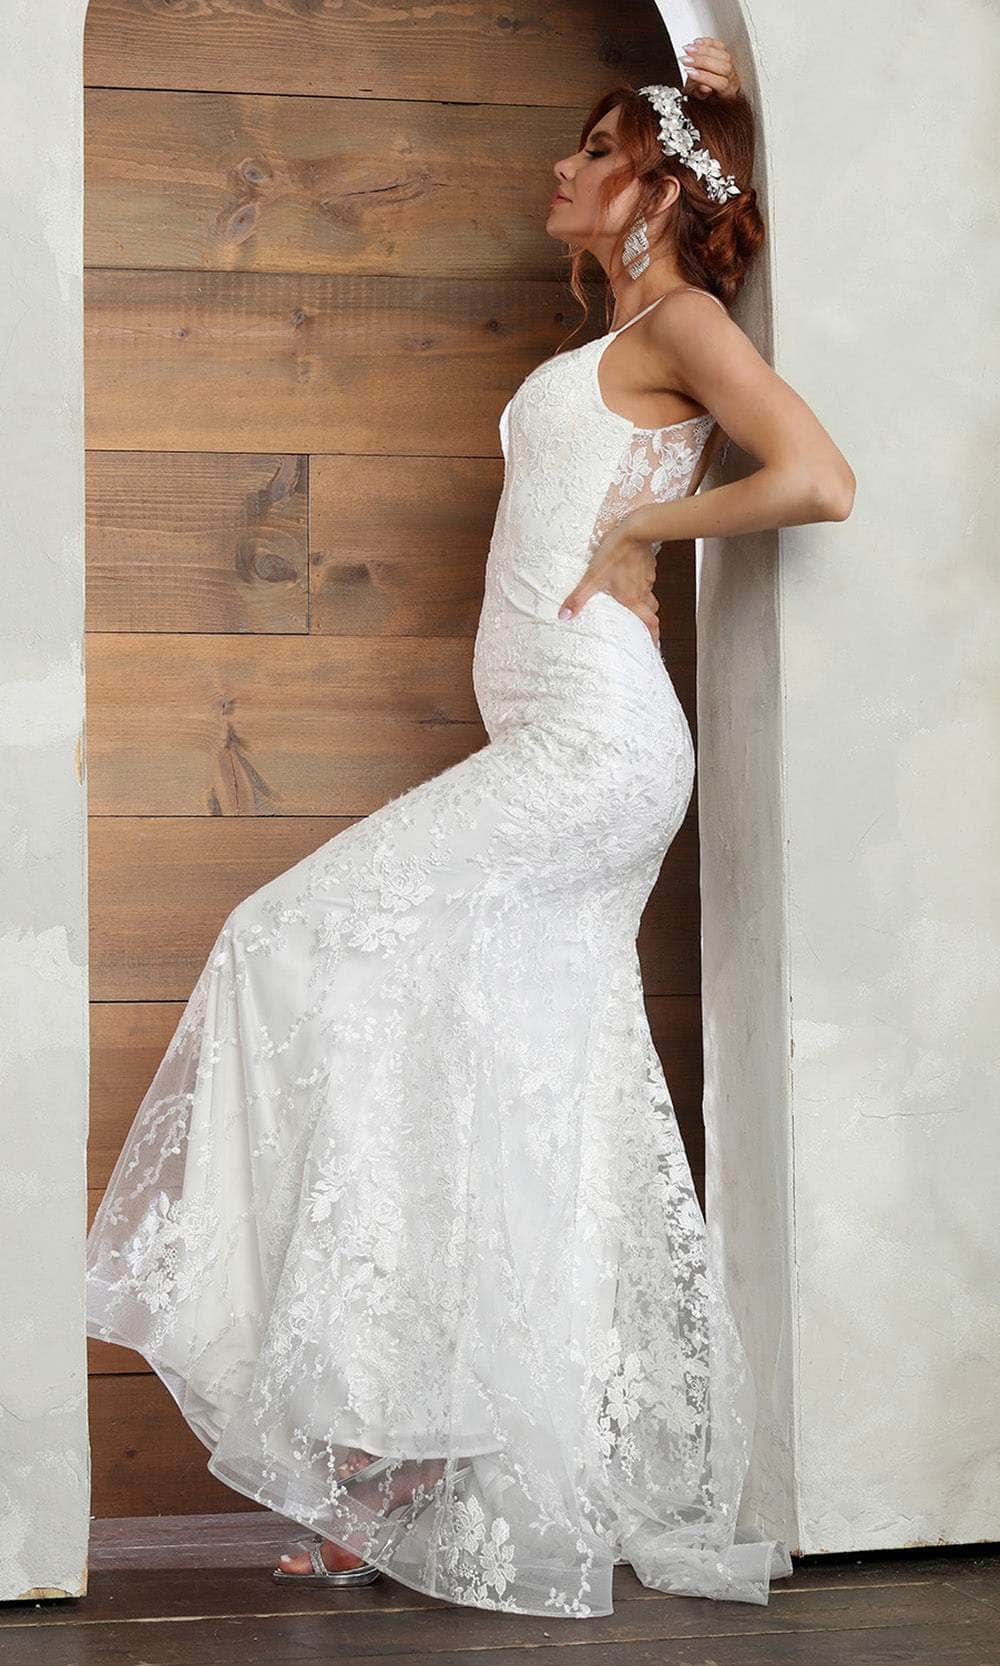 May Queen RQ8048 - Illusion Scoop Back Wedding Gown Wedding Dresses